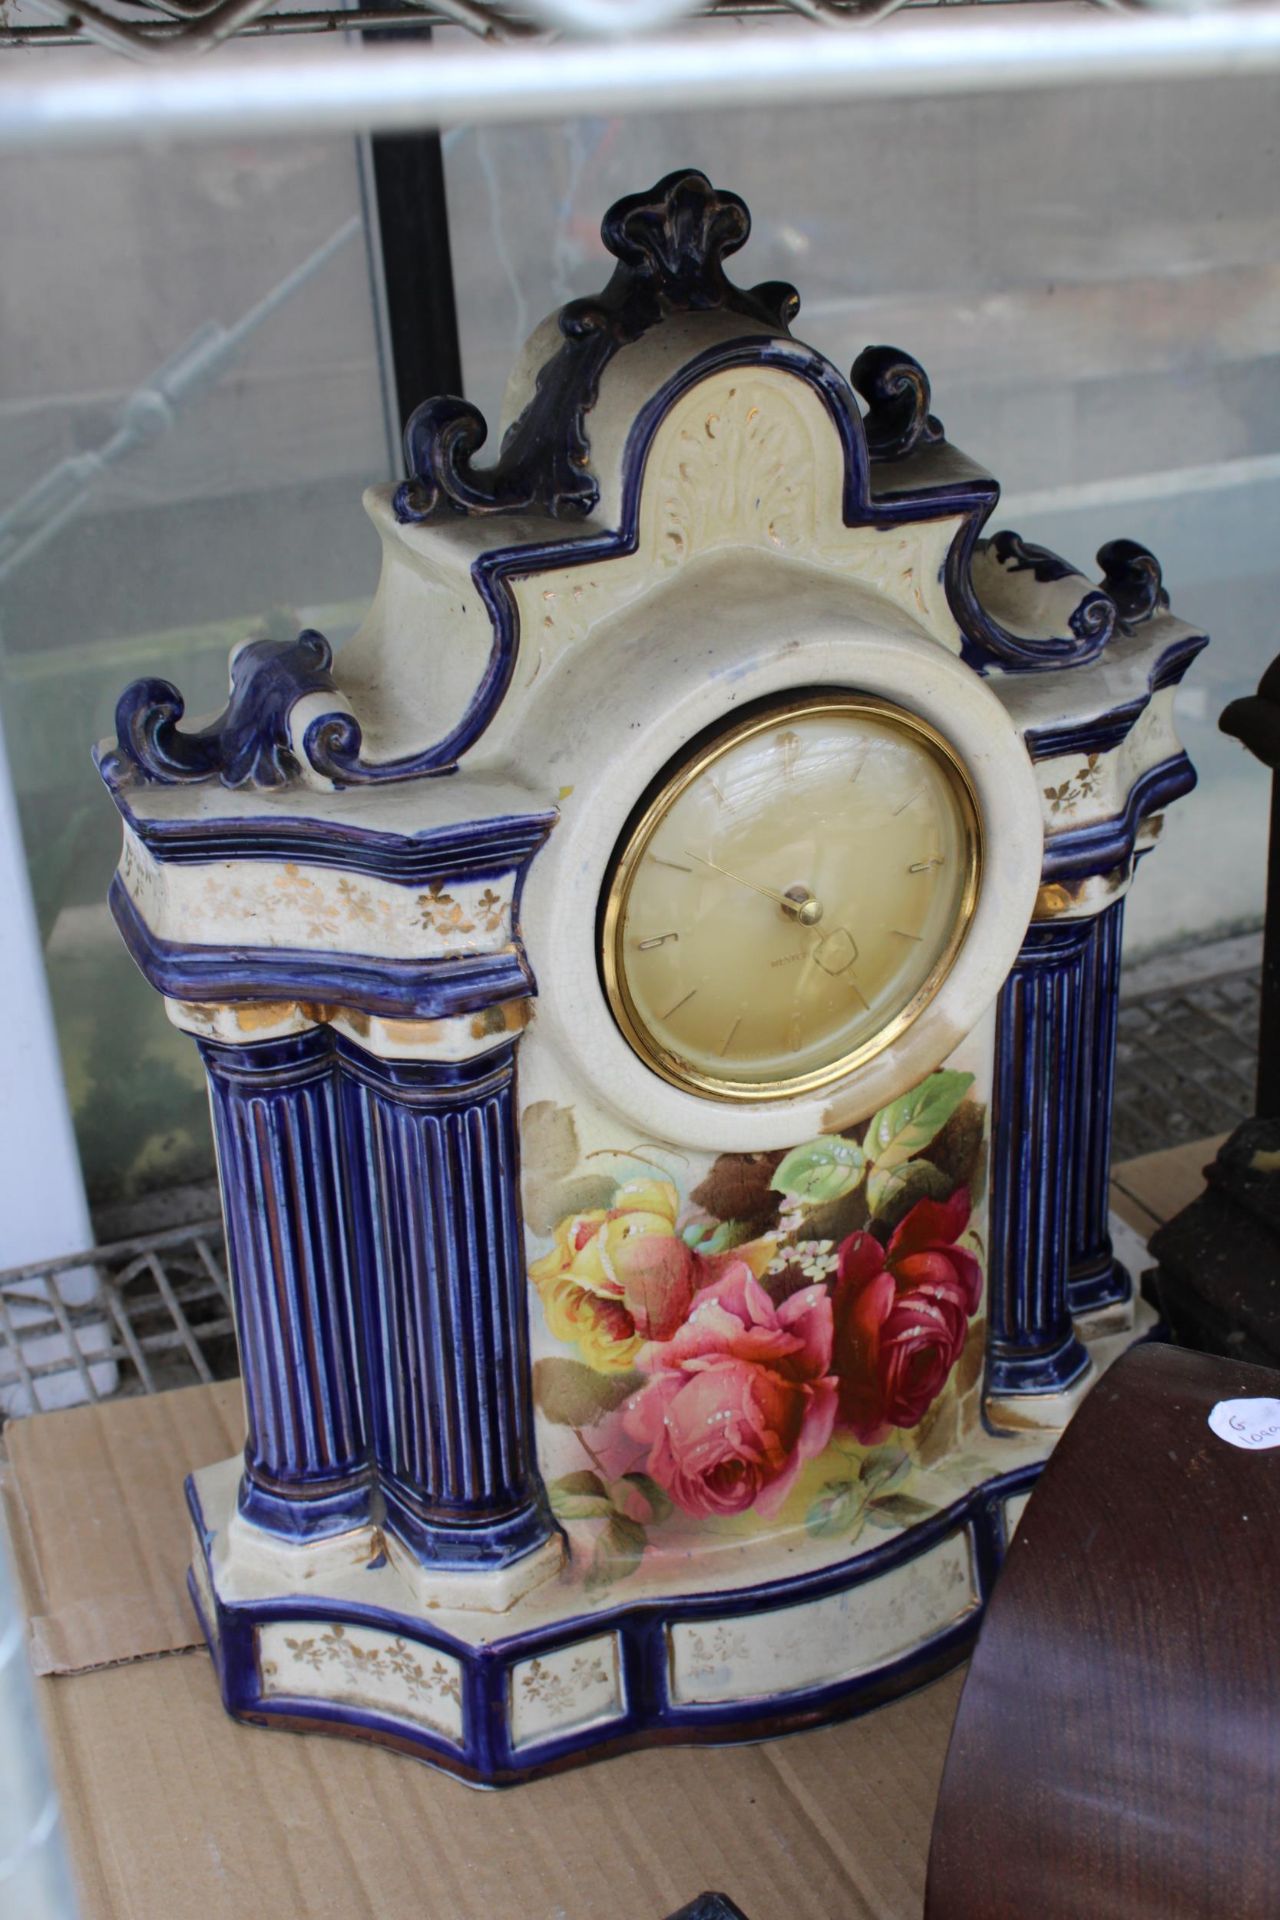 AN ASSORTMENT OF VINTAGE CLOCKS TO INCLUDE A CERAMIC MANTLE CLOCK, AN ANIVERSARY CLOCK AND A - Image 2 of 6